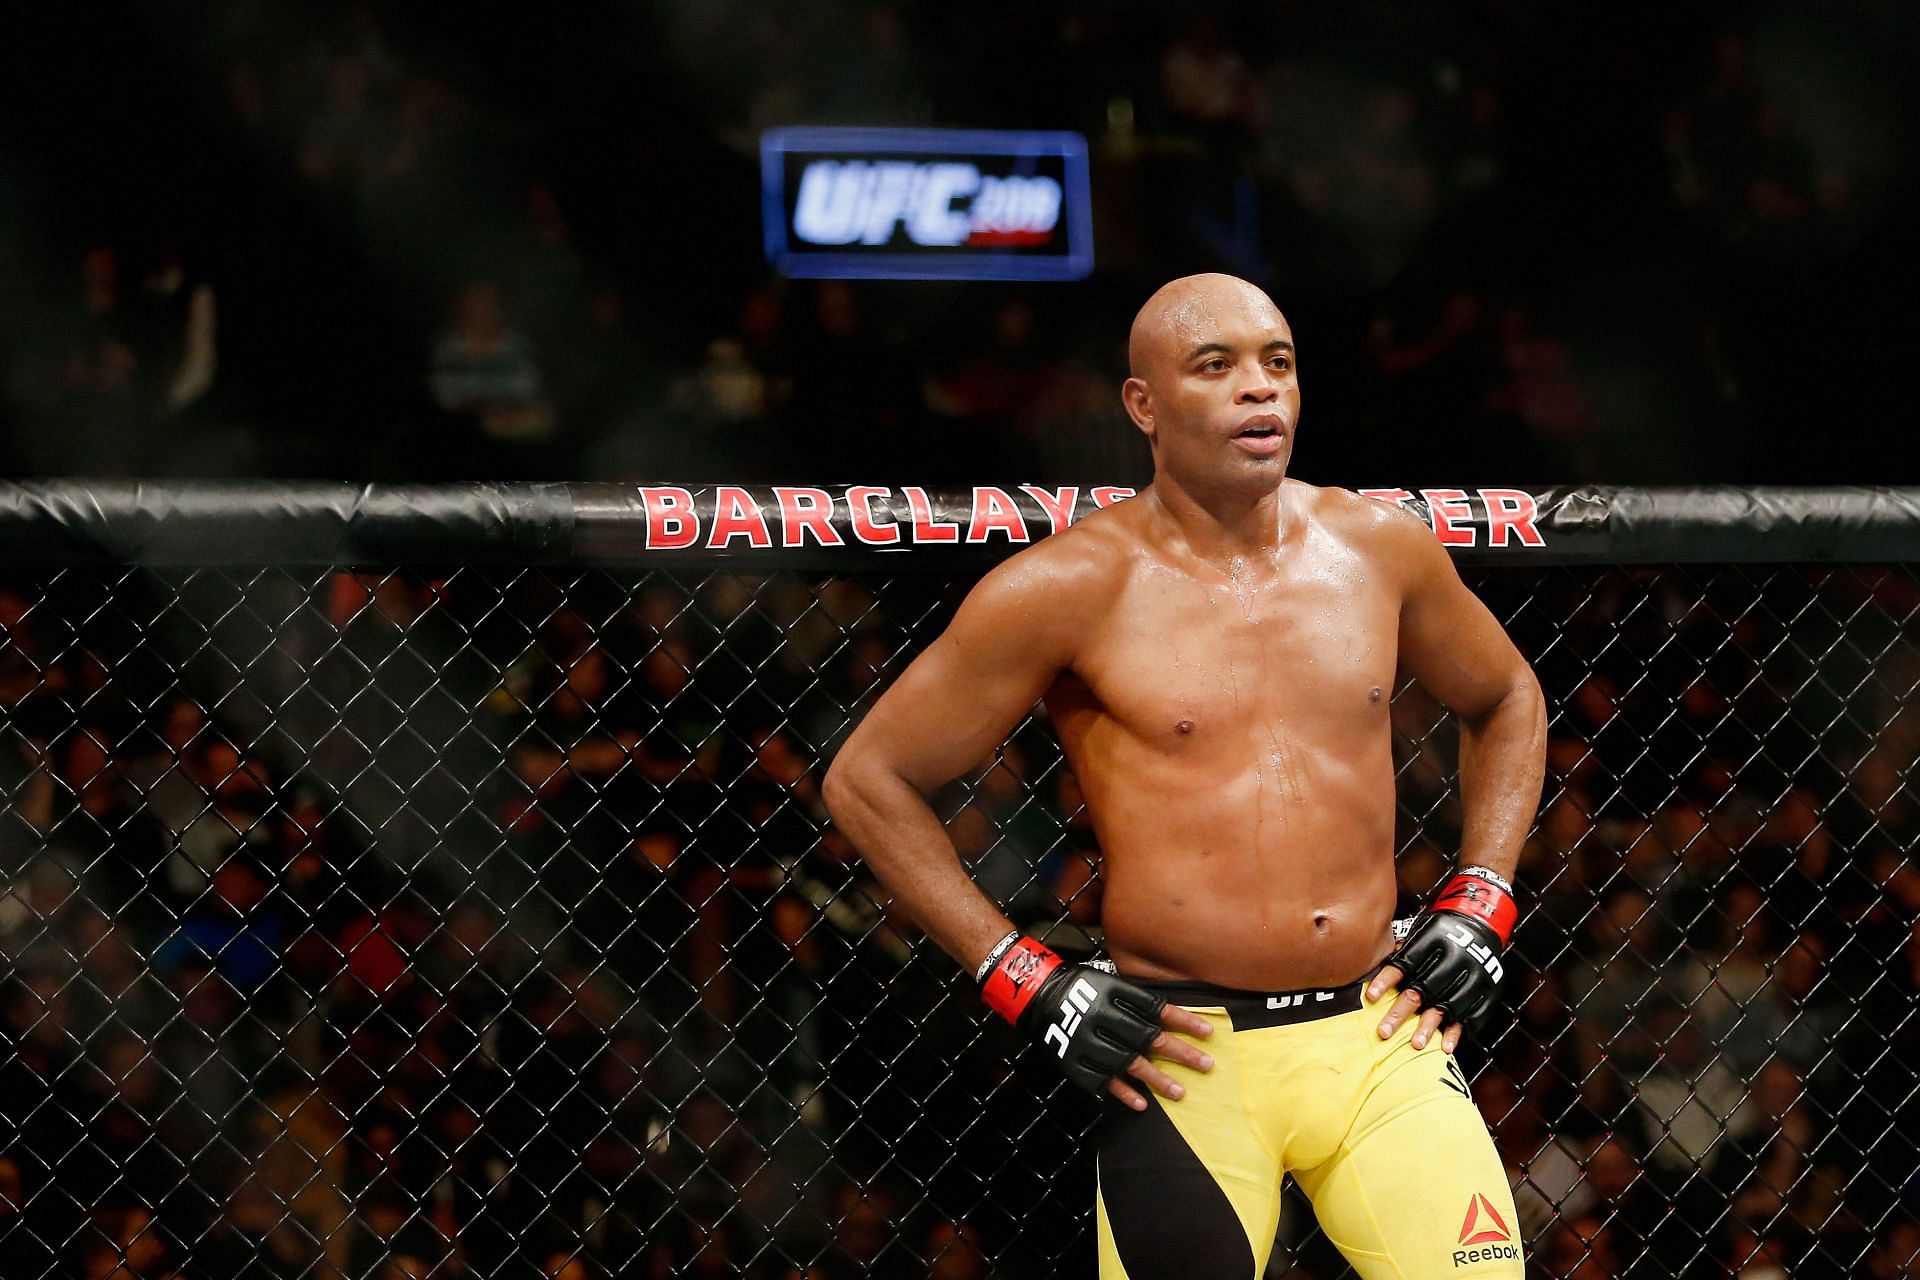 Anderson Silva cemented his legacy with a win over Chael Sonnen during the first International Fight Week